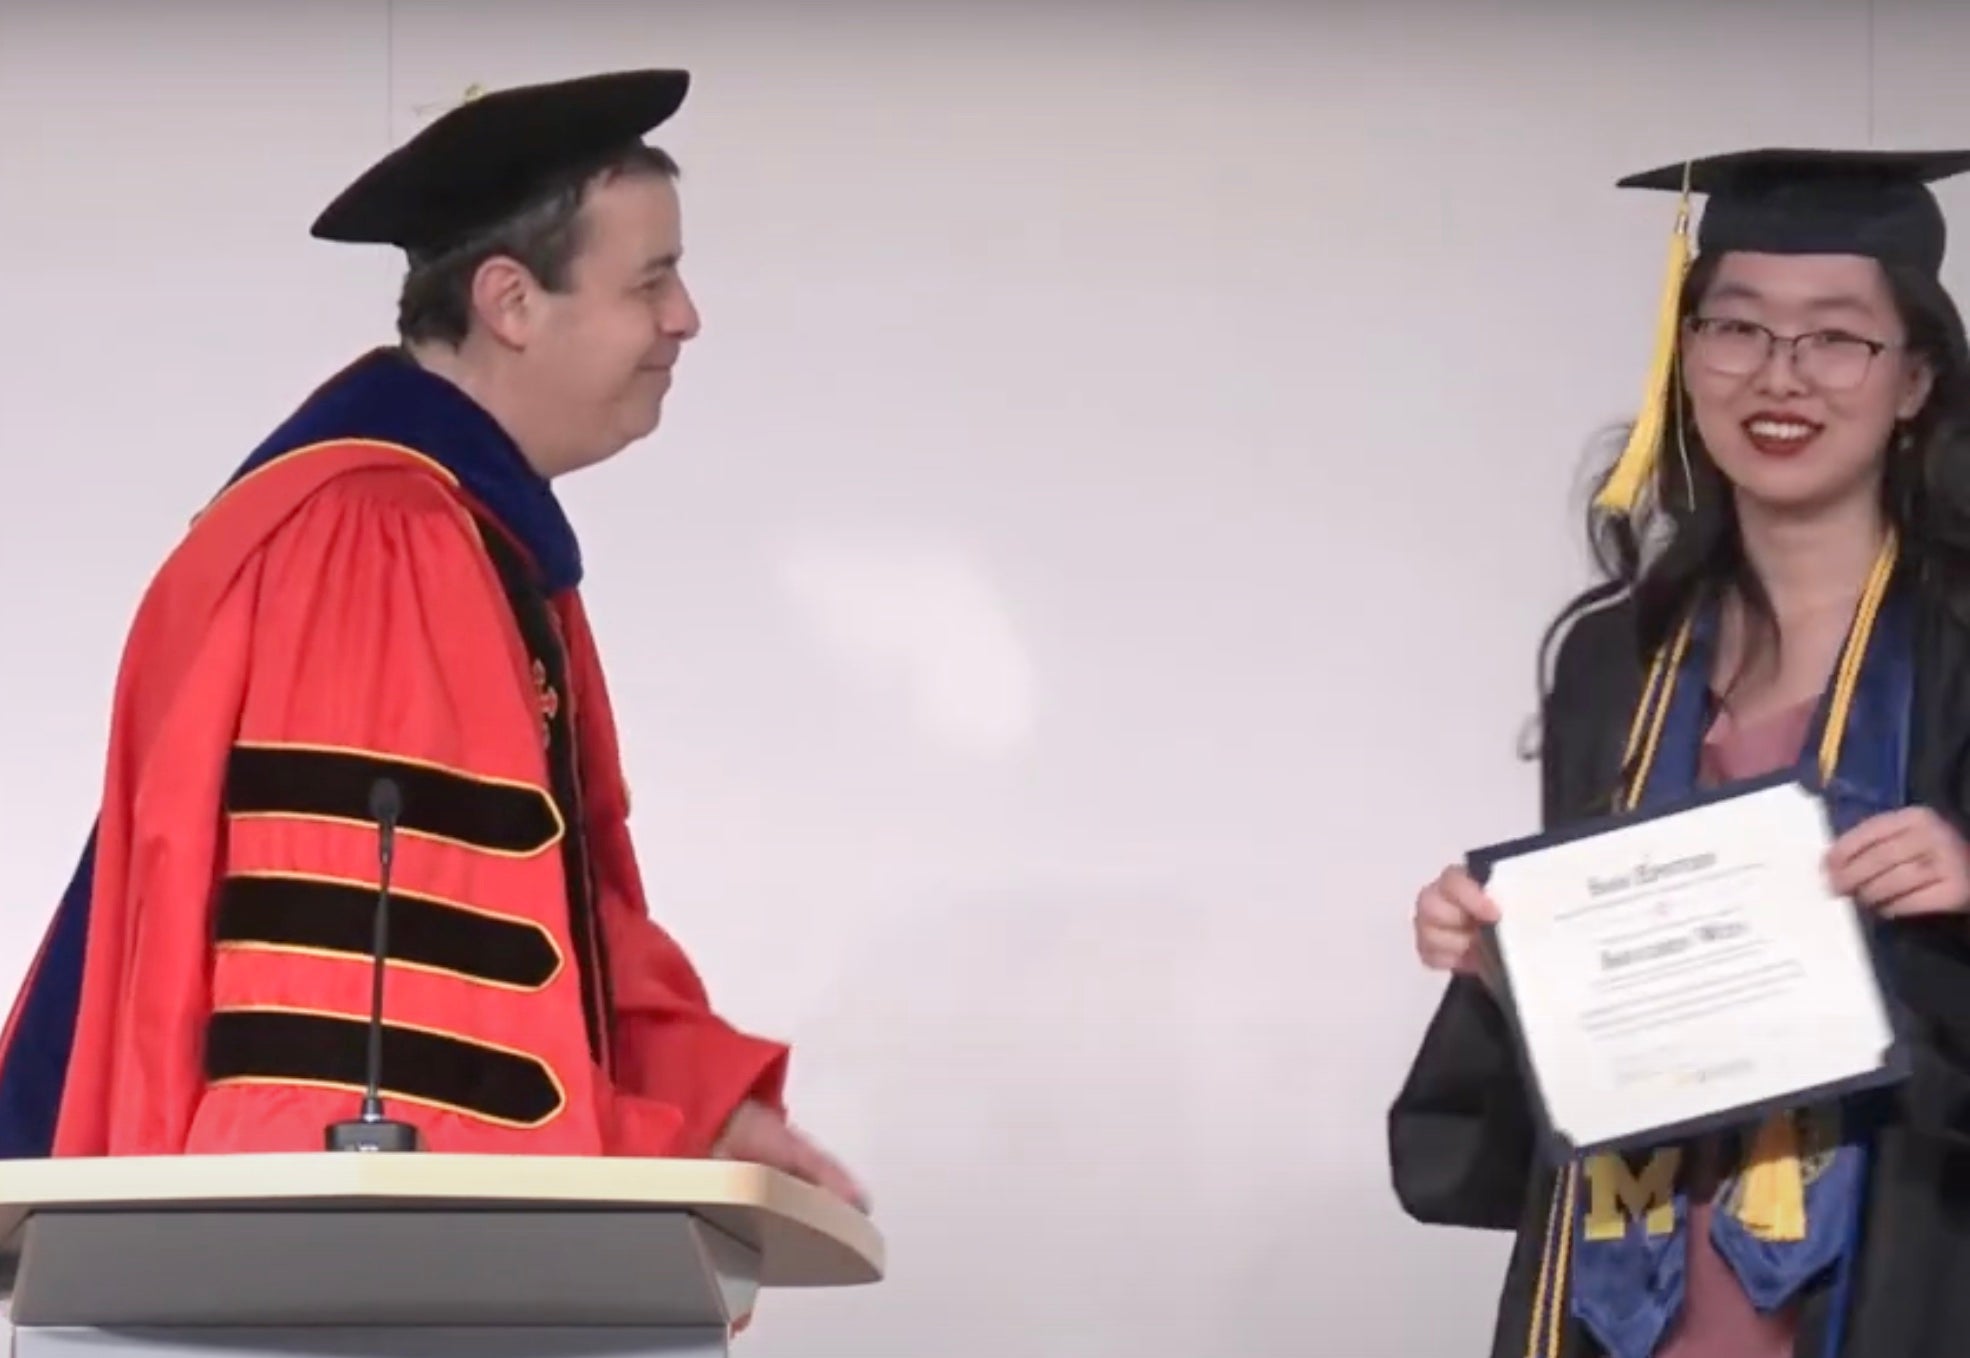 A student receives an award certificate from a professor wearing a red academic gown